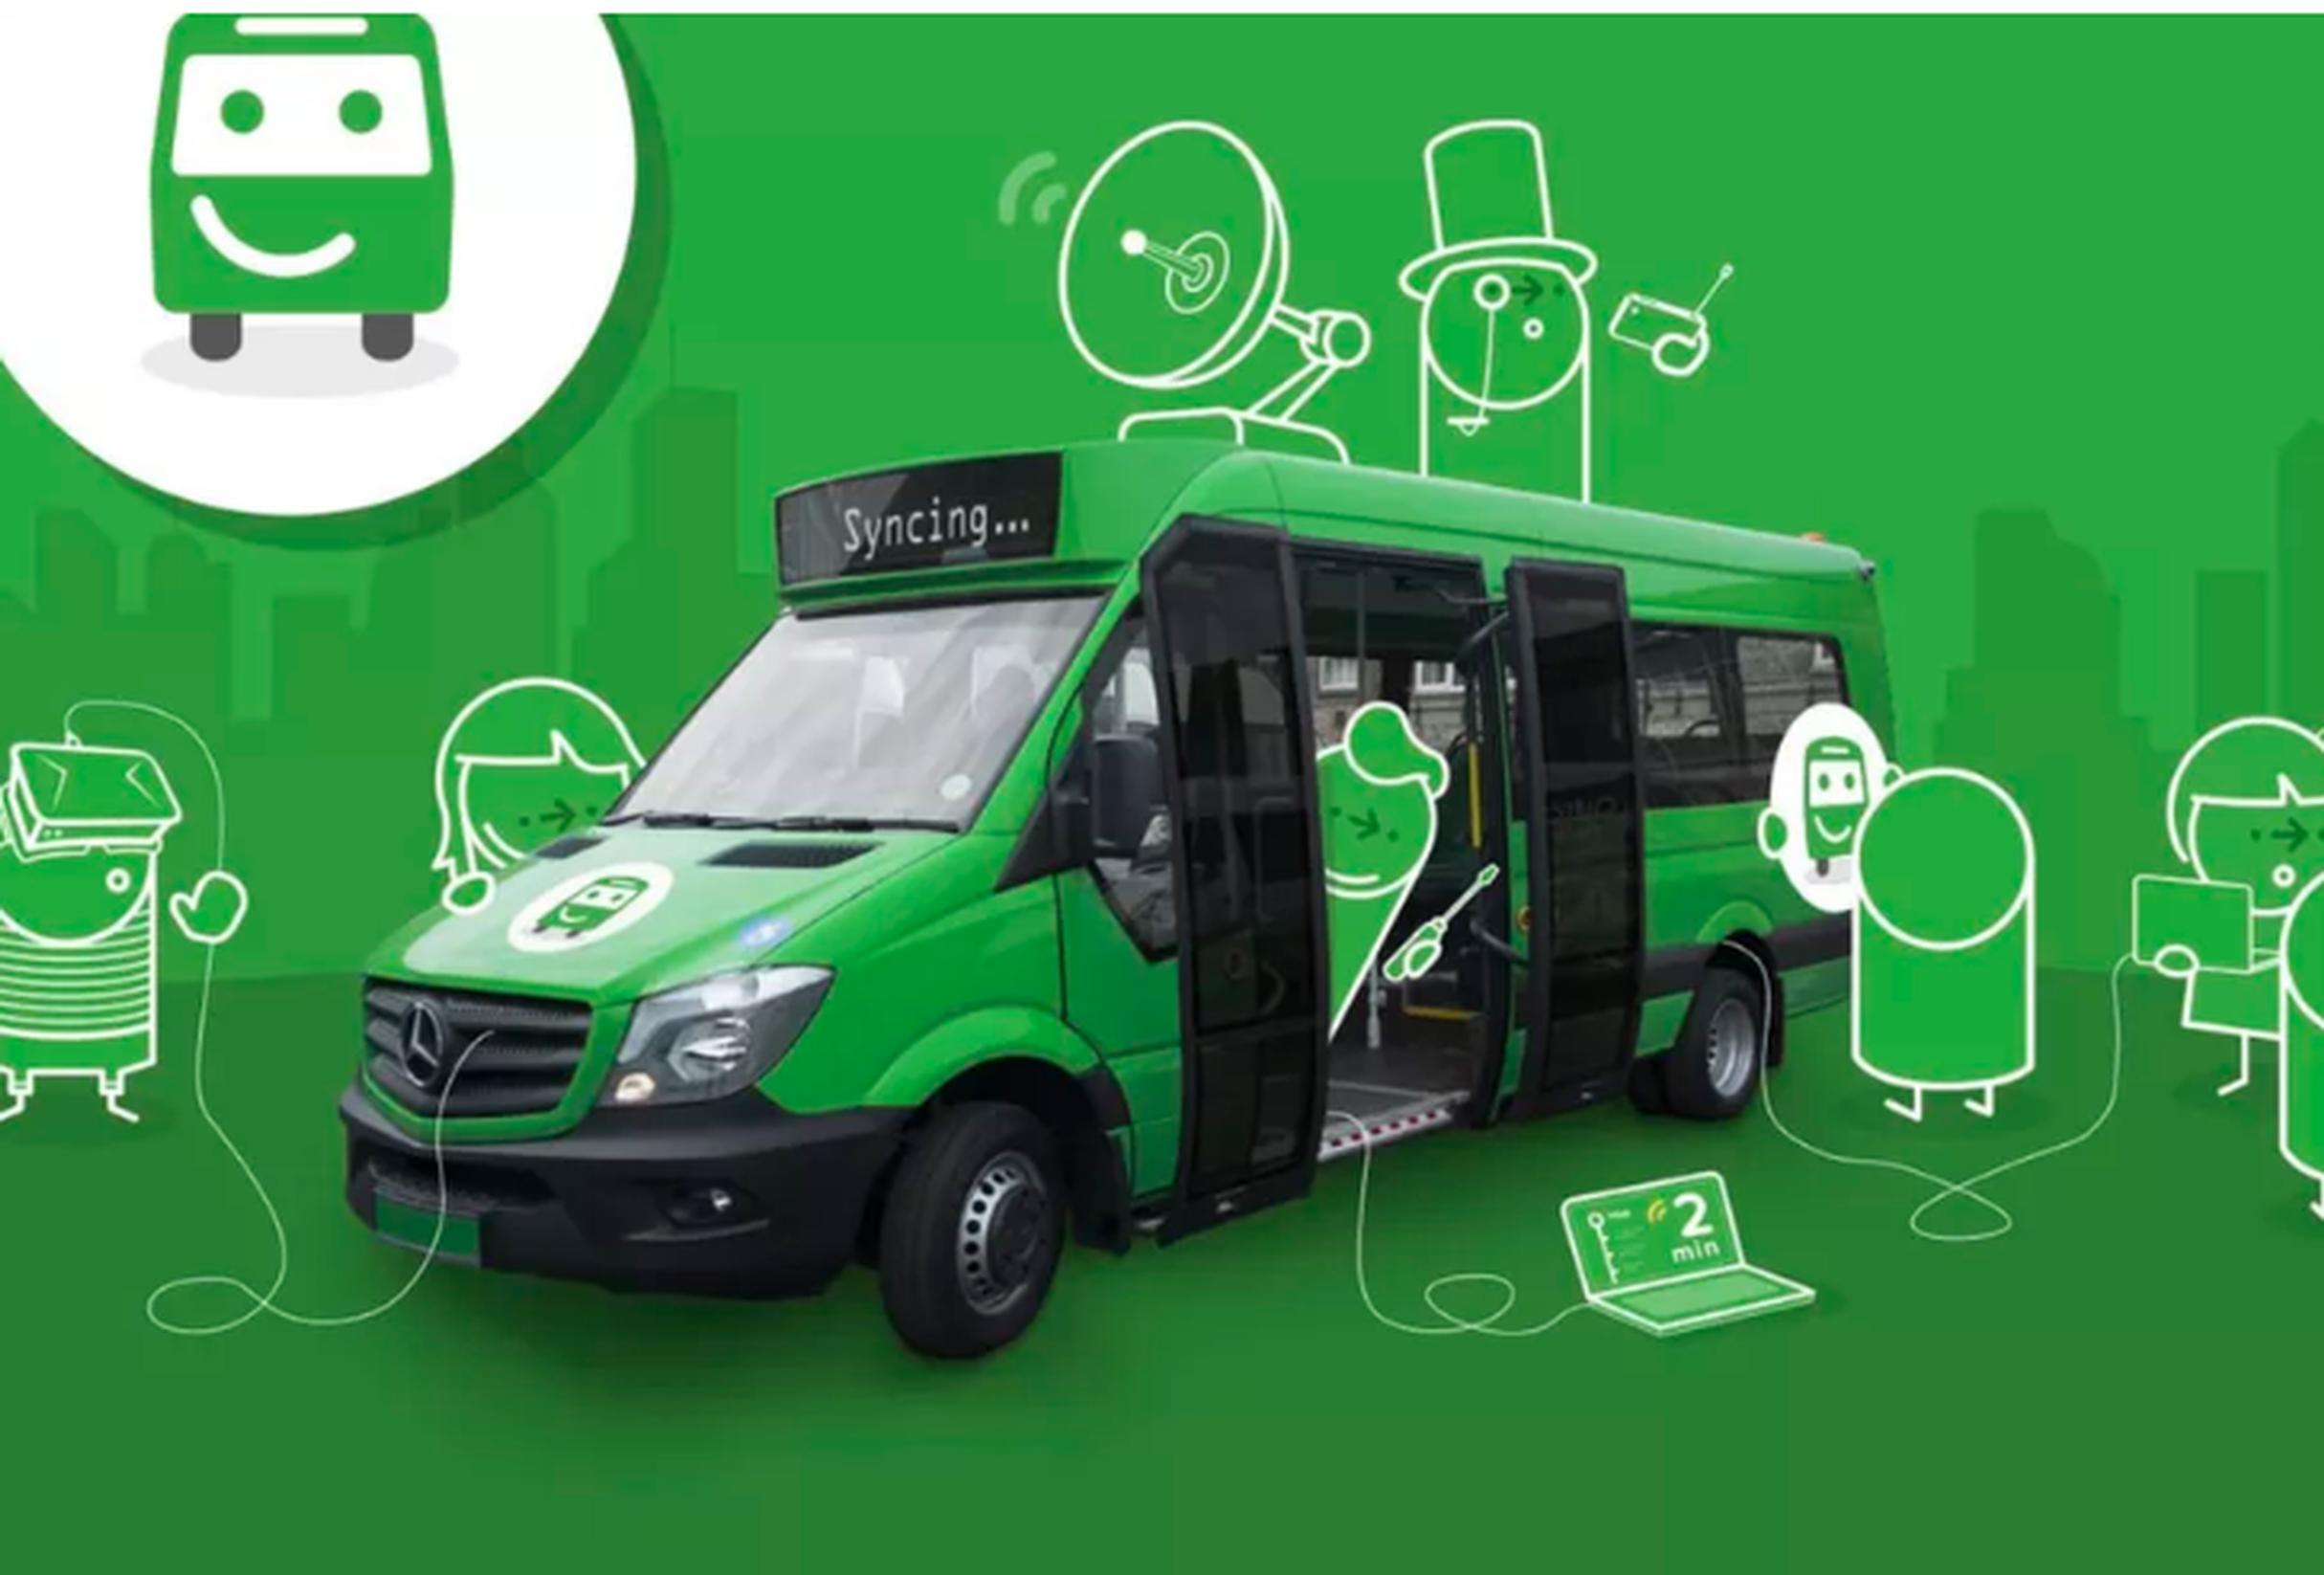 Citymapper`s new Smart Ride initiative will see a small fleet of eight-seater vans offer rides around a number of routes in London, changing their course based on customer demand